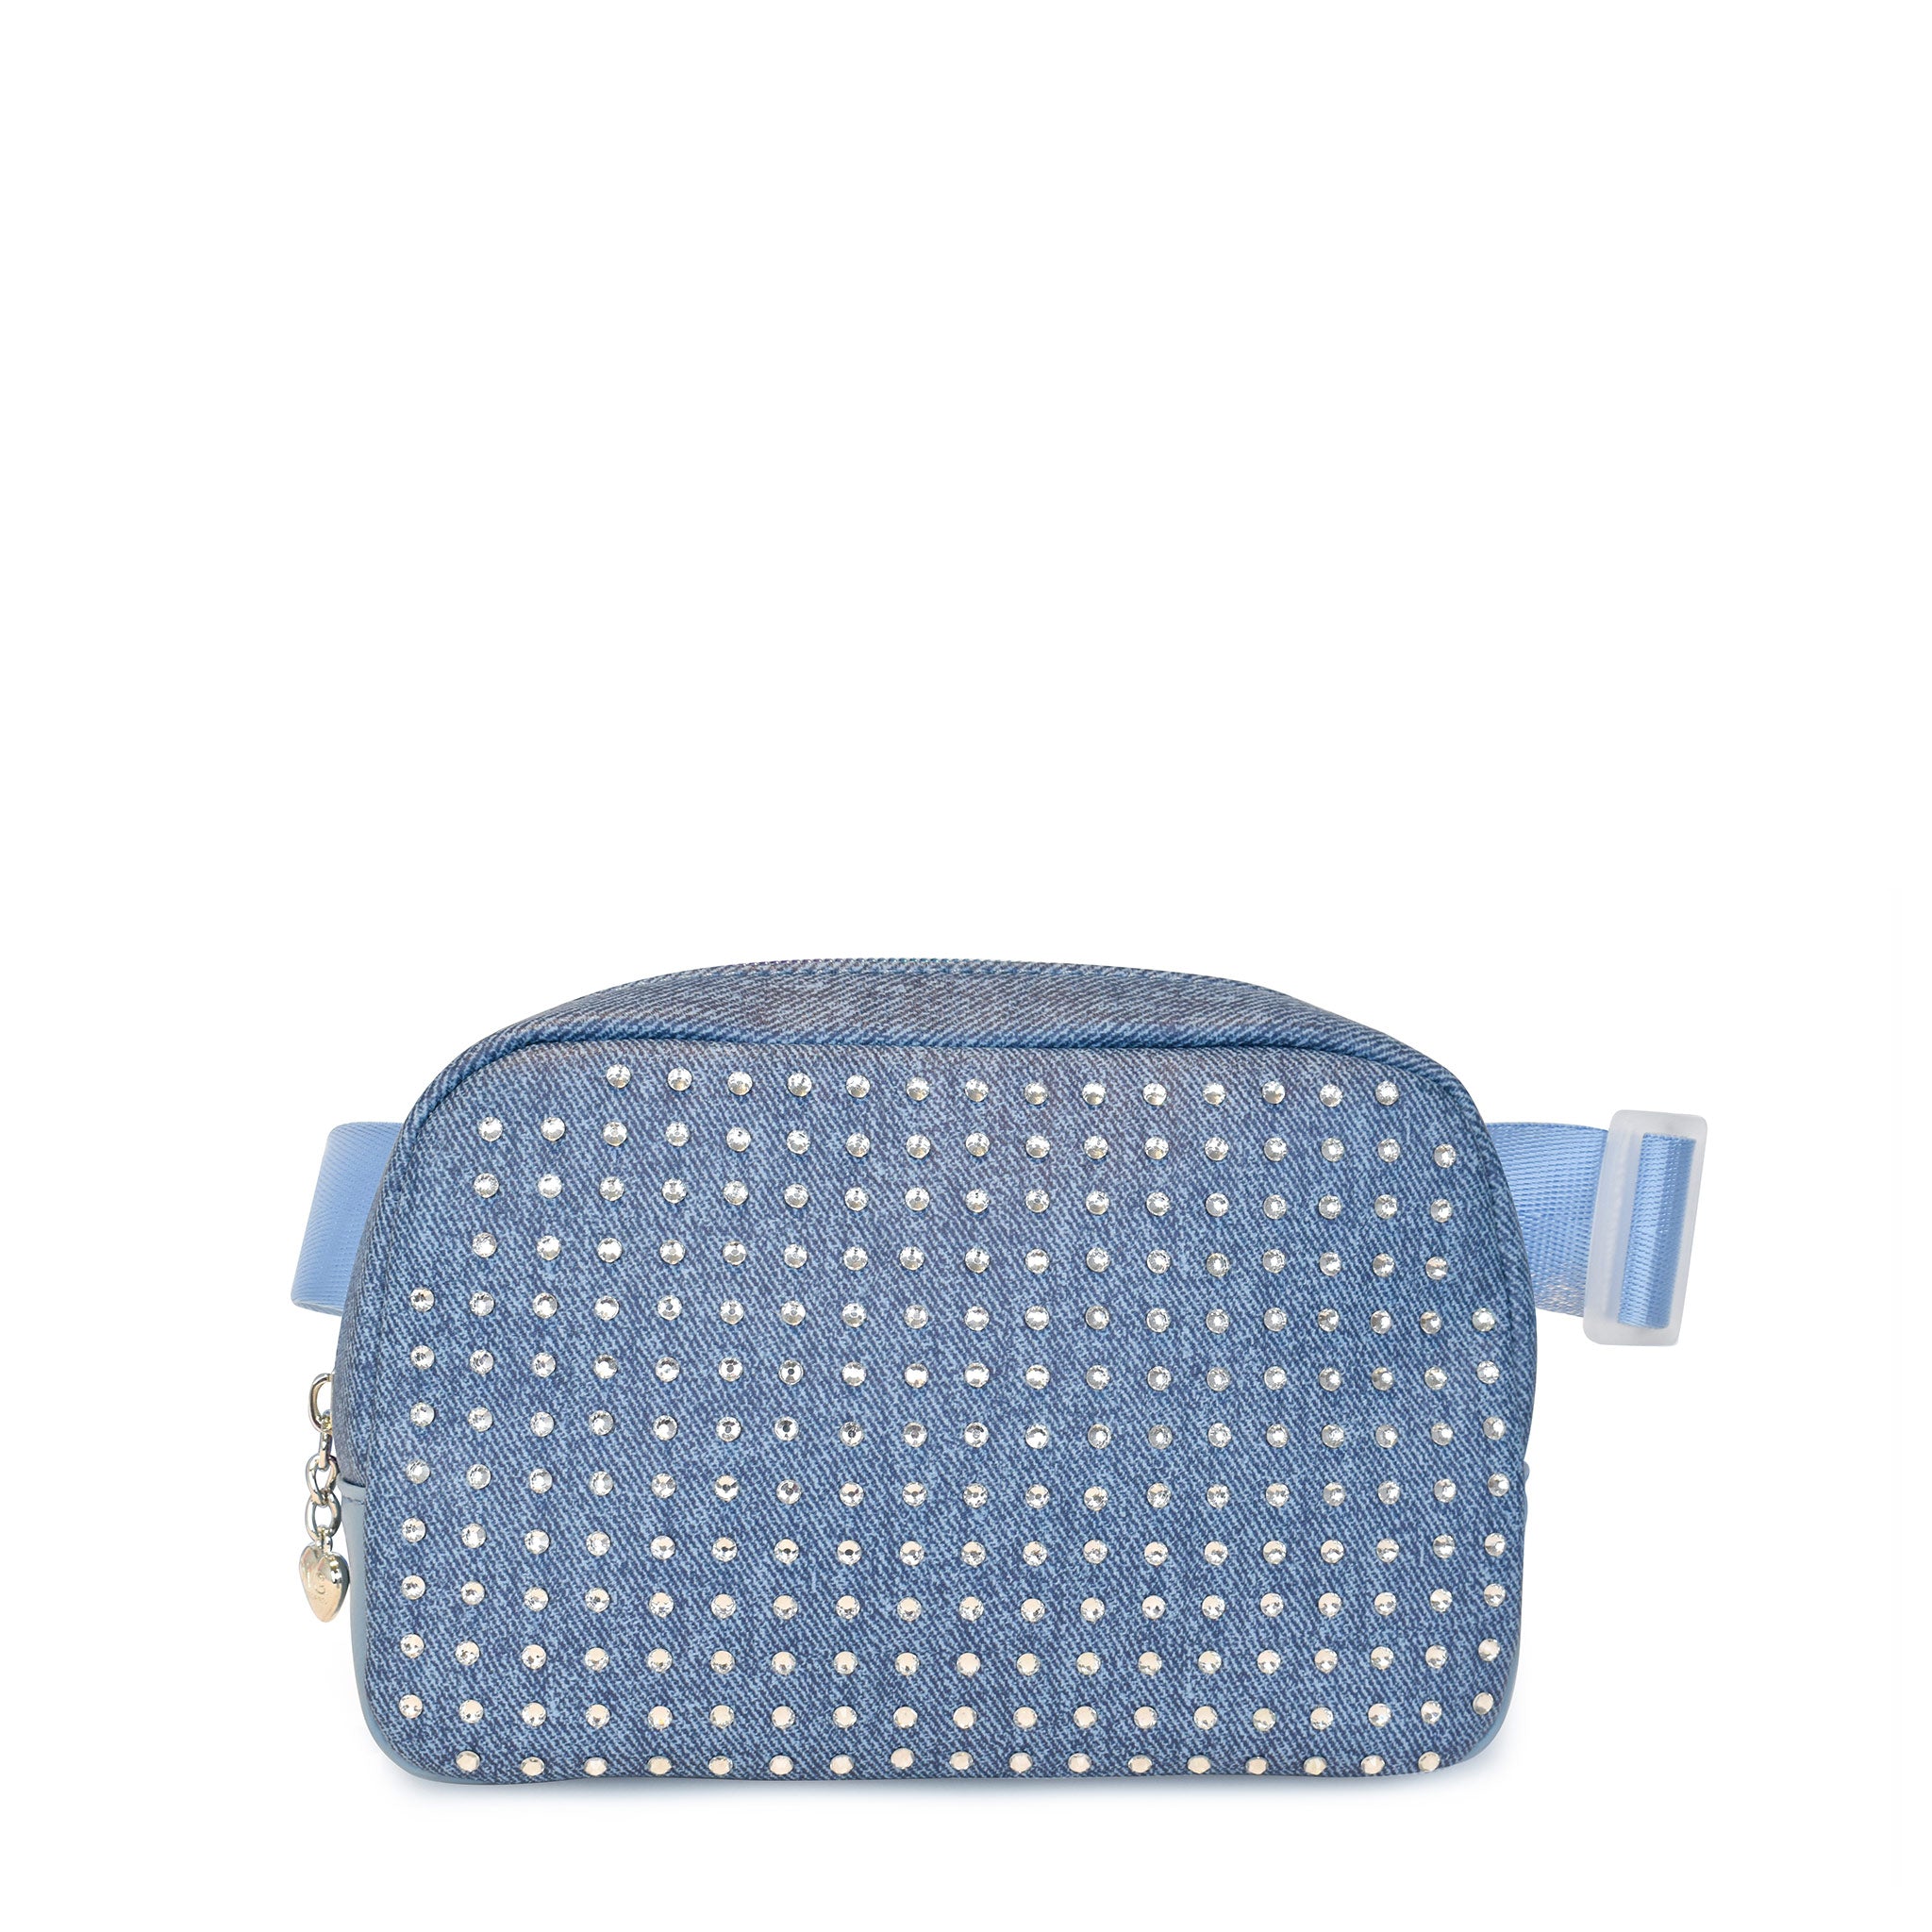 Front view of a rhinestone covered denim fanny pack with a light blue adjustable belt